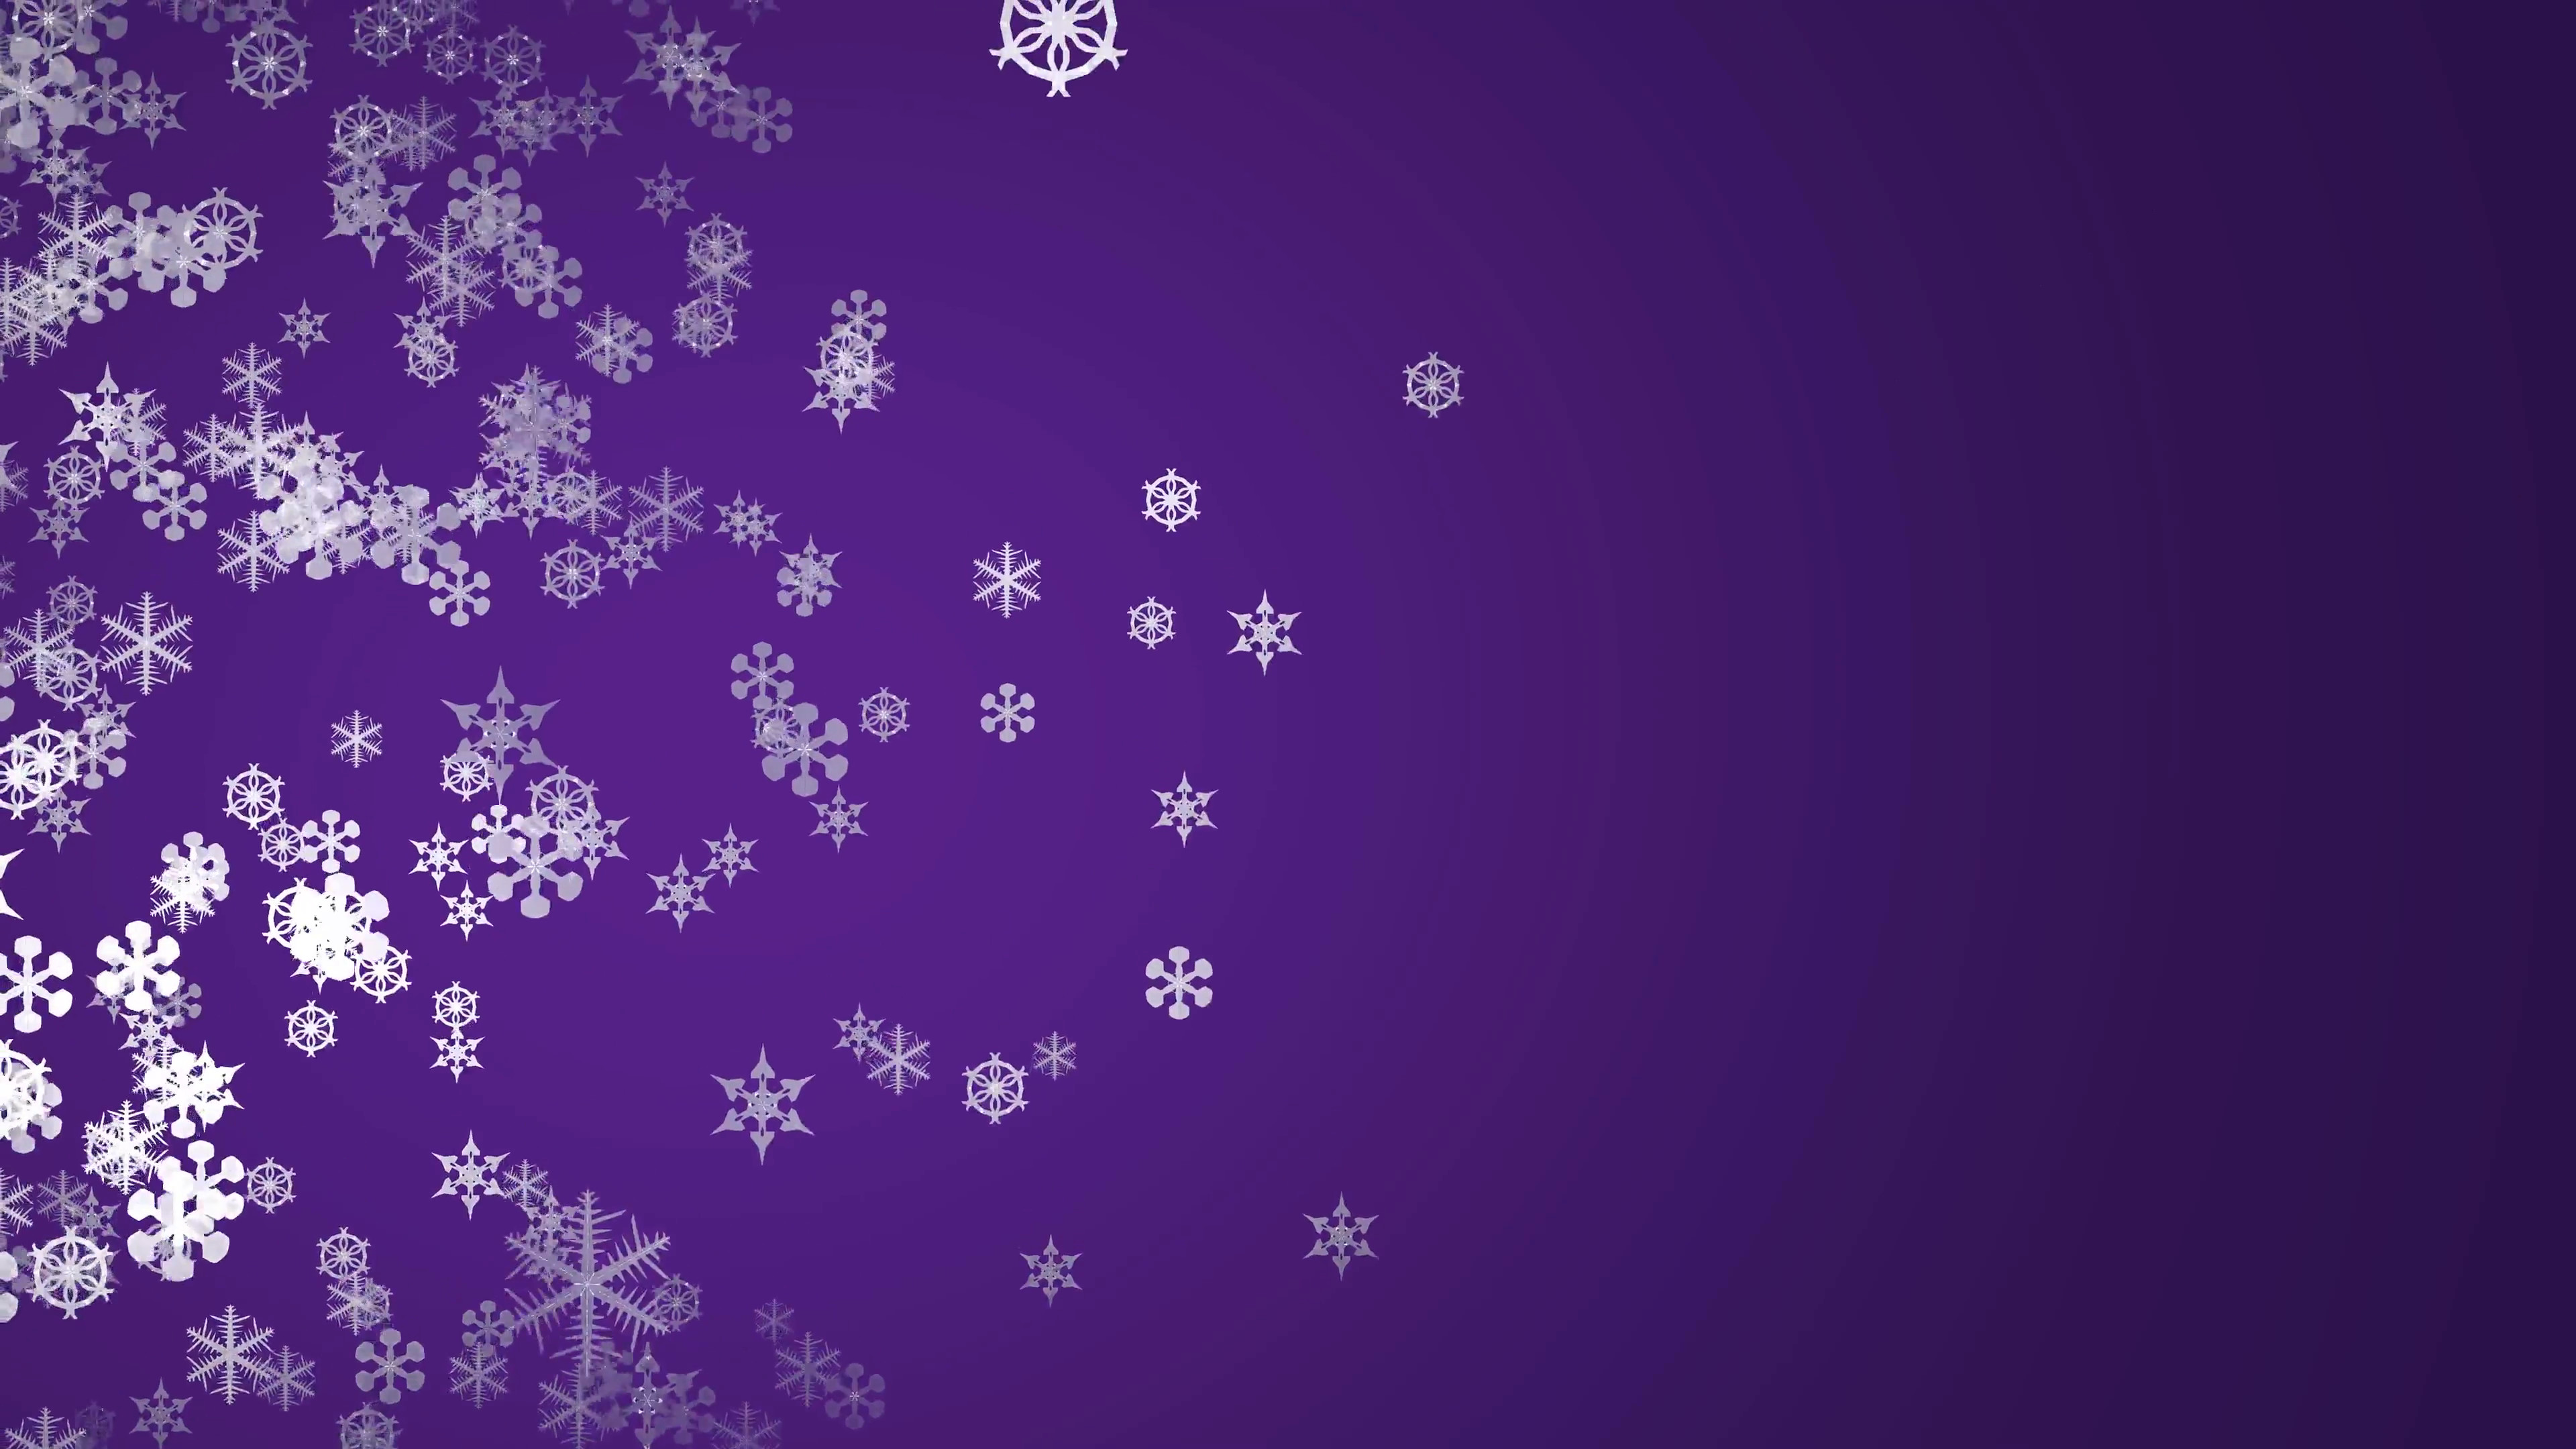 3840x2160 4K Abstract white snowflakes falling on a half pane purple background